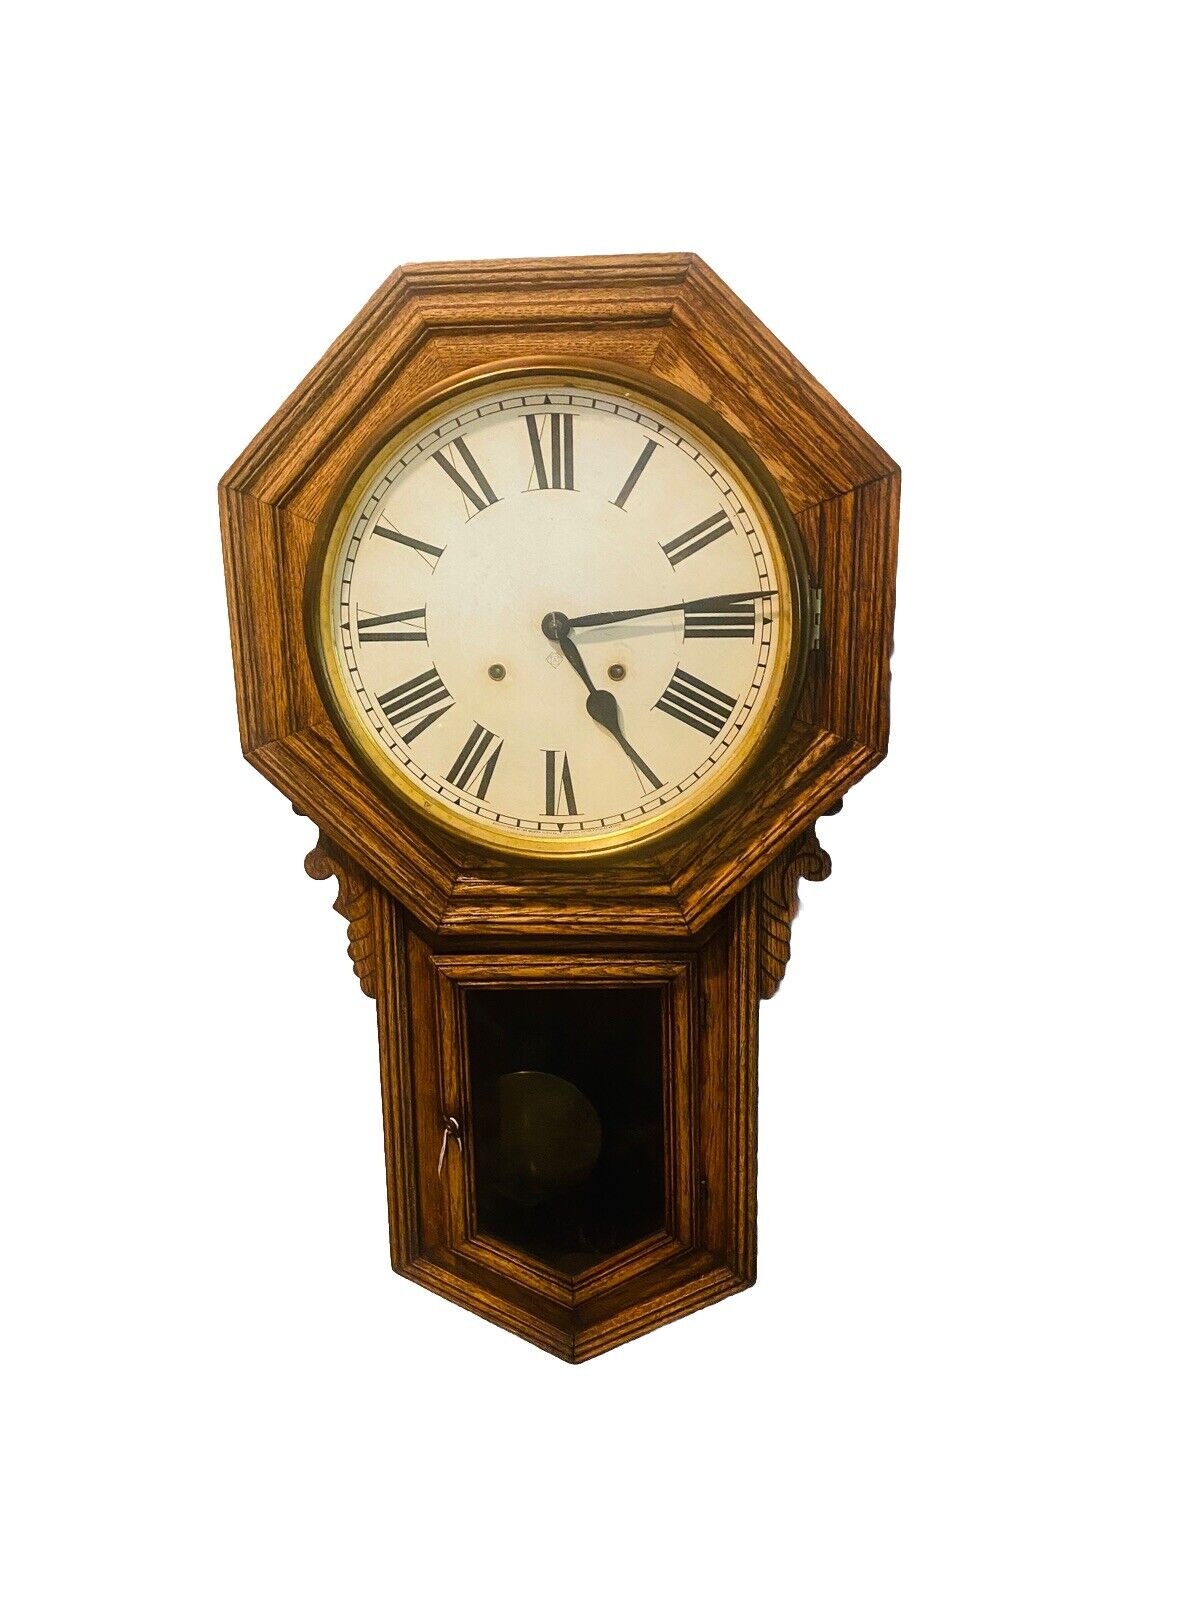 Antique Ansonia Schoolhouse Long Drop Style Wall Clock Runs And Chimes